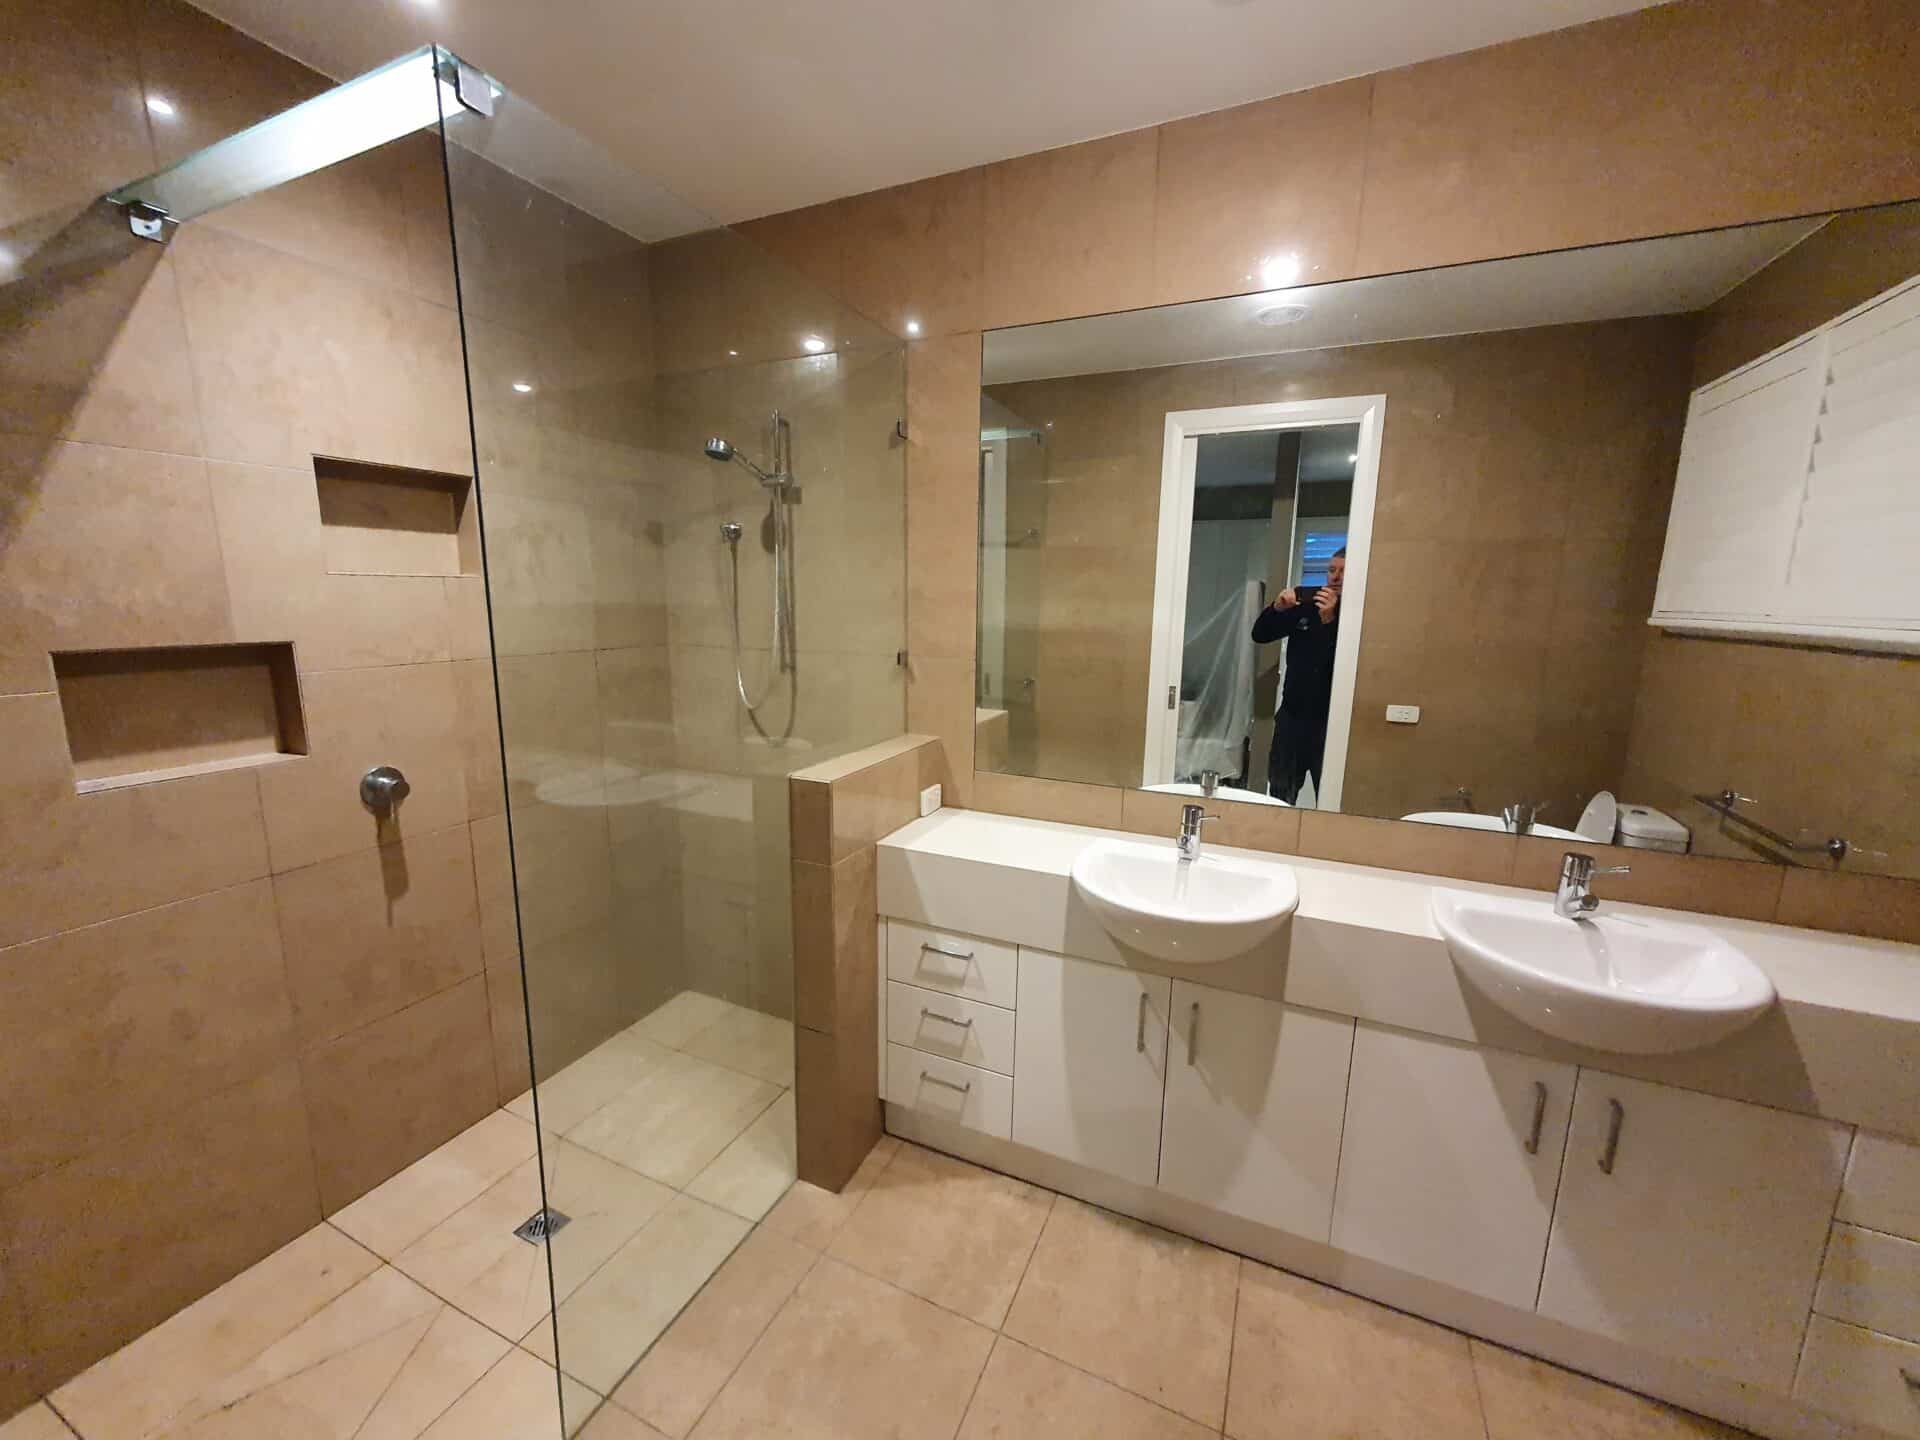 A modern renovated bathroom with double sinks, a glass shower and a large mirror.